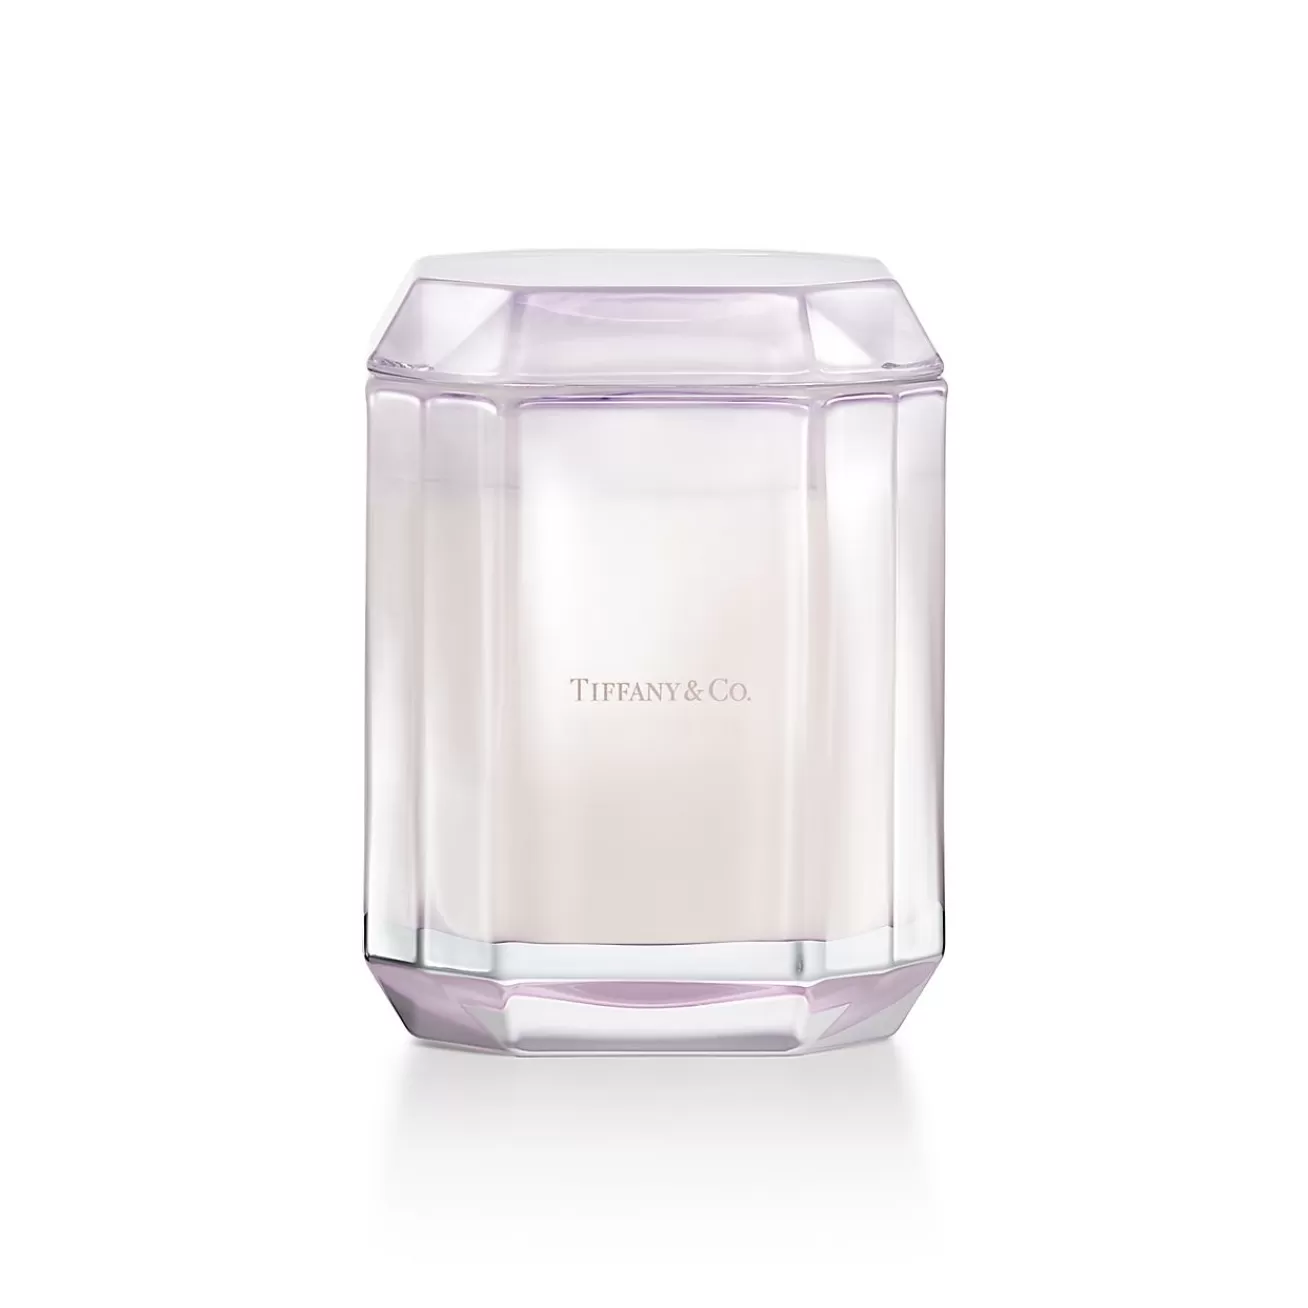 Tiffany & Co. Tiffany Facets About Love Candle in Kunzite-colored Glass | ^ Business Gifts | Decor